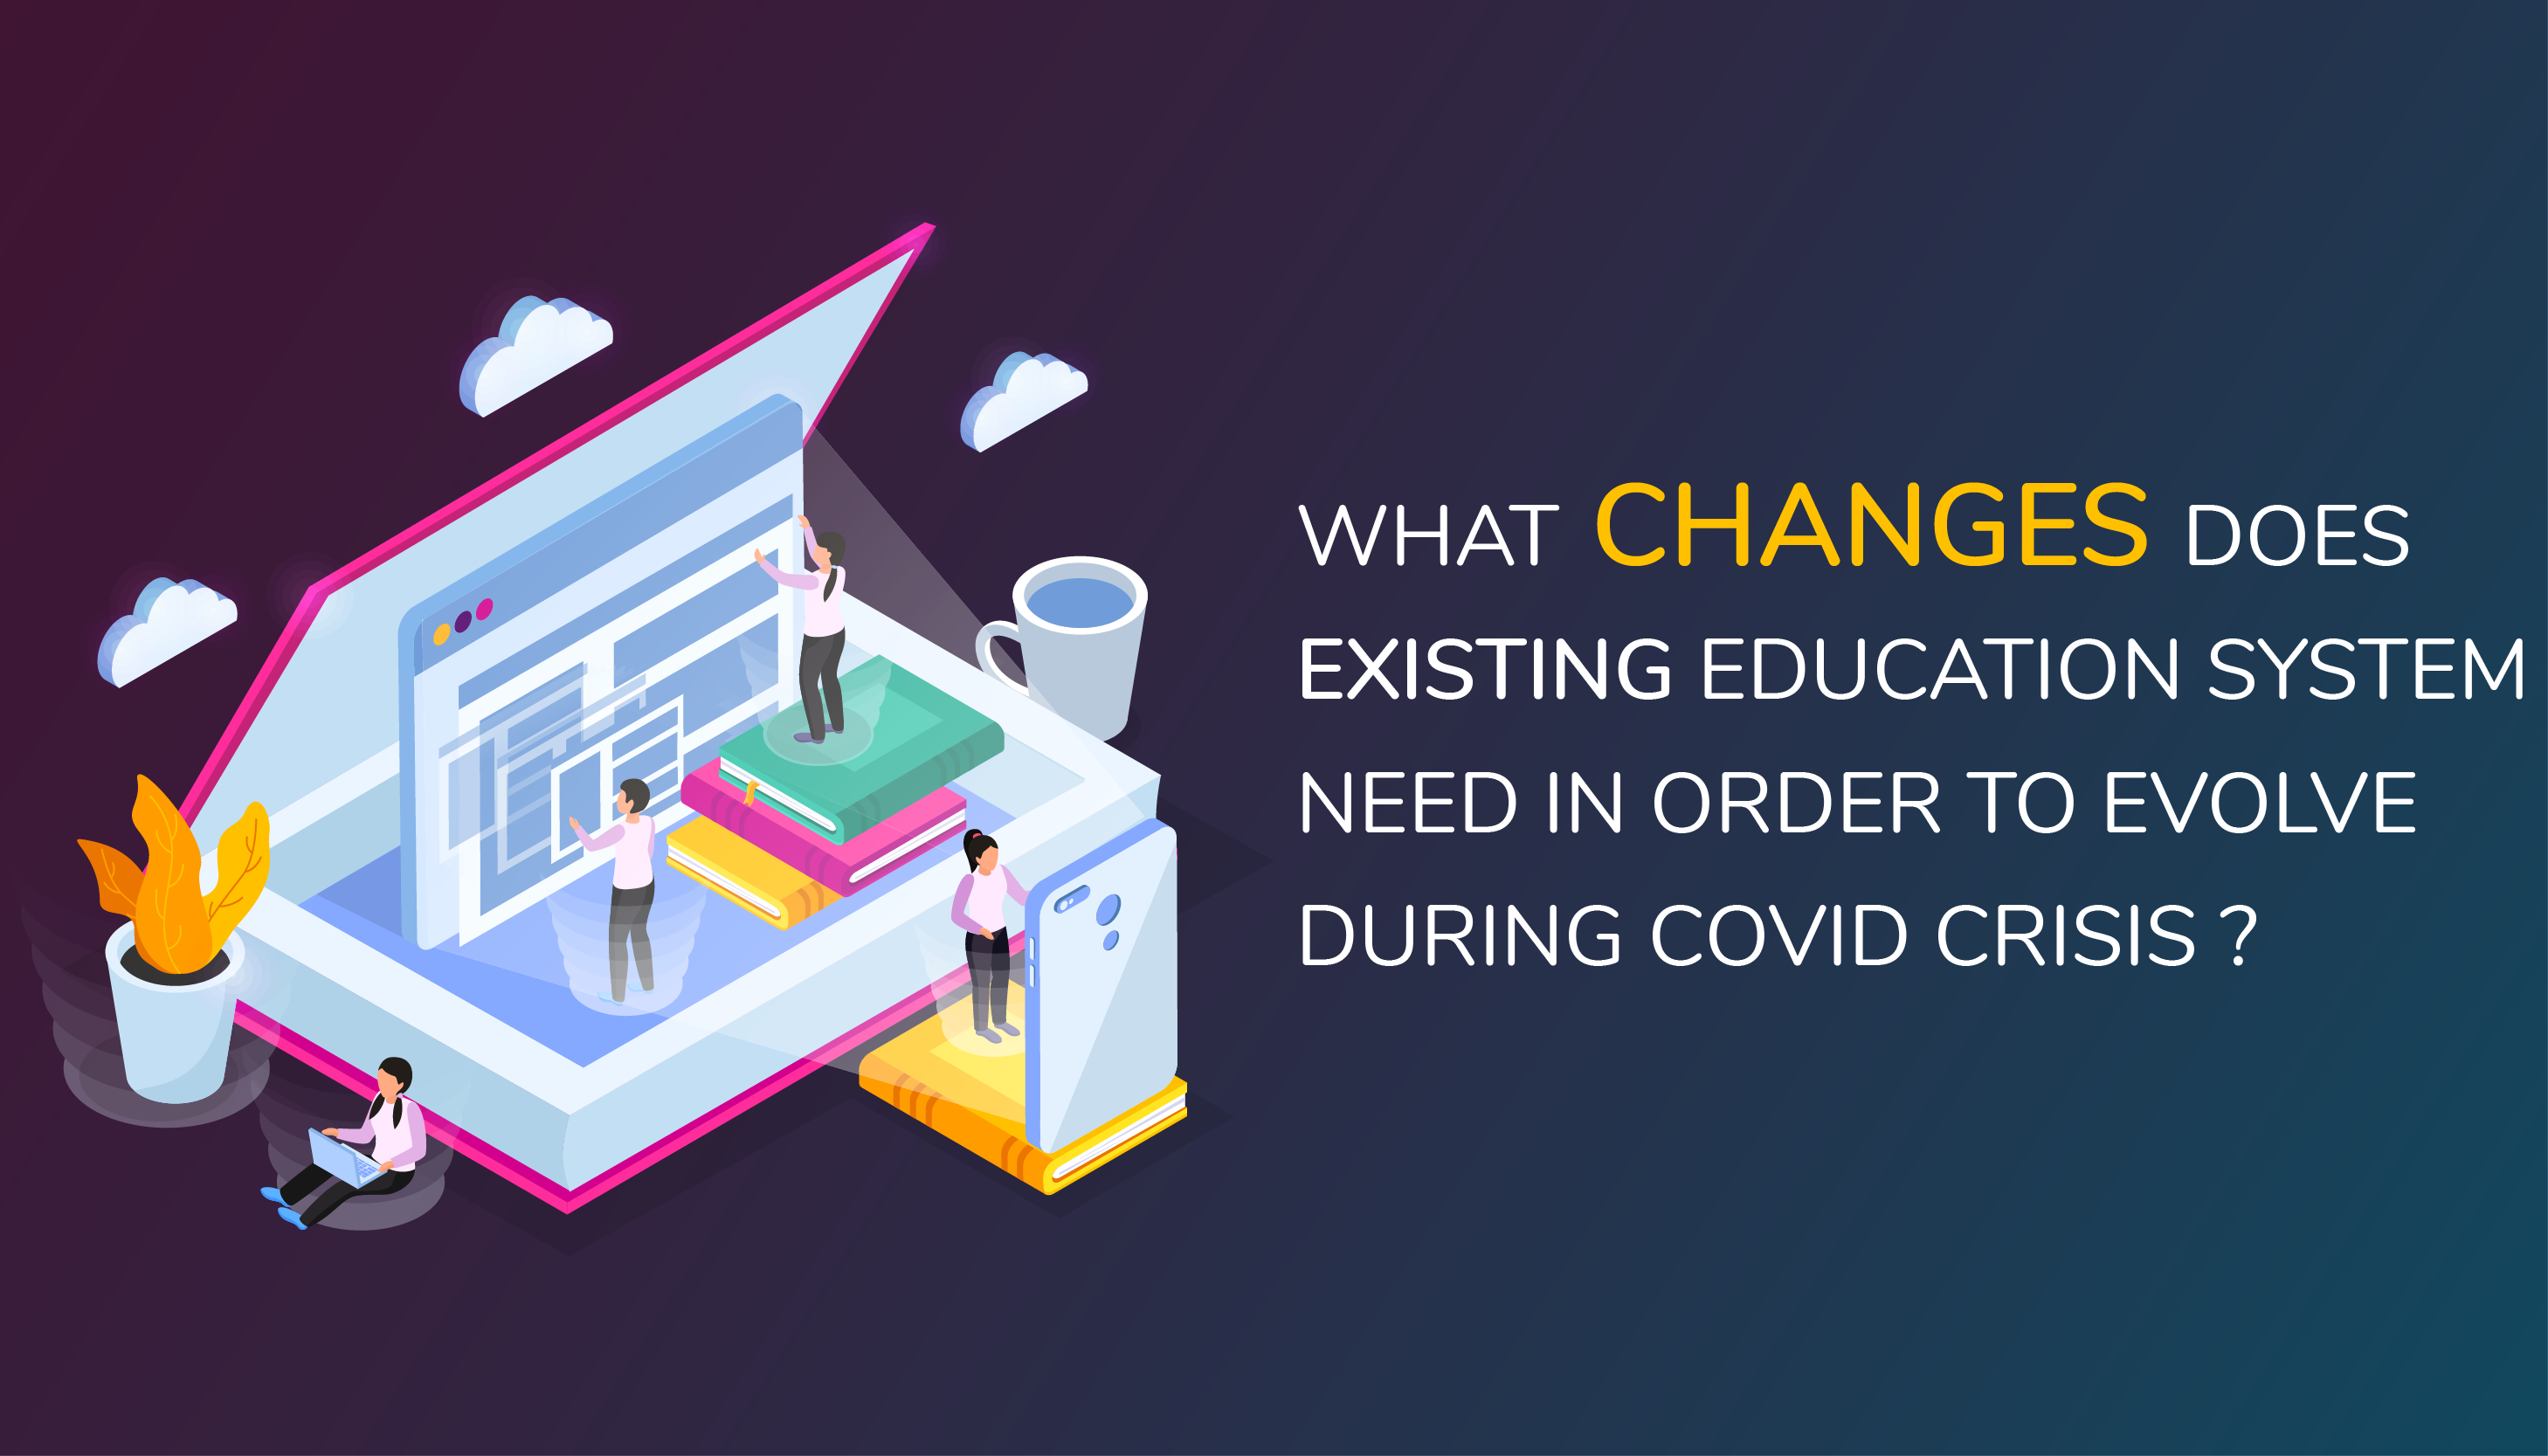 What changes does existing education system need in order to evolve during COVID crisis? - Edukit